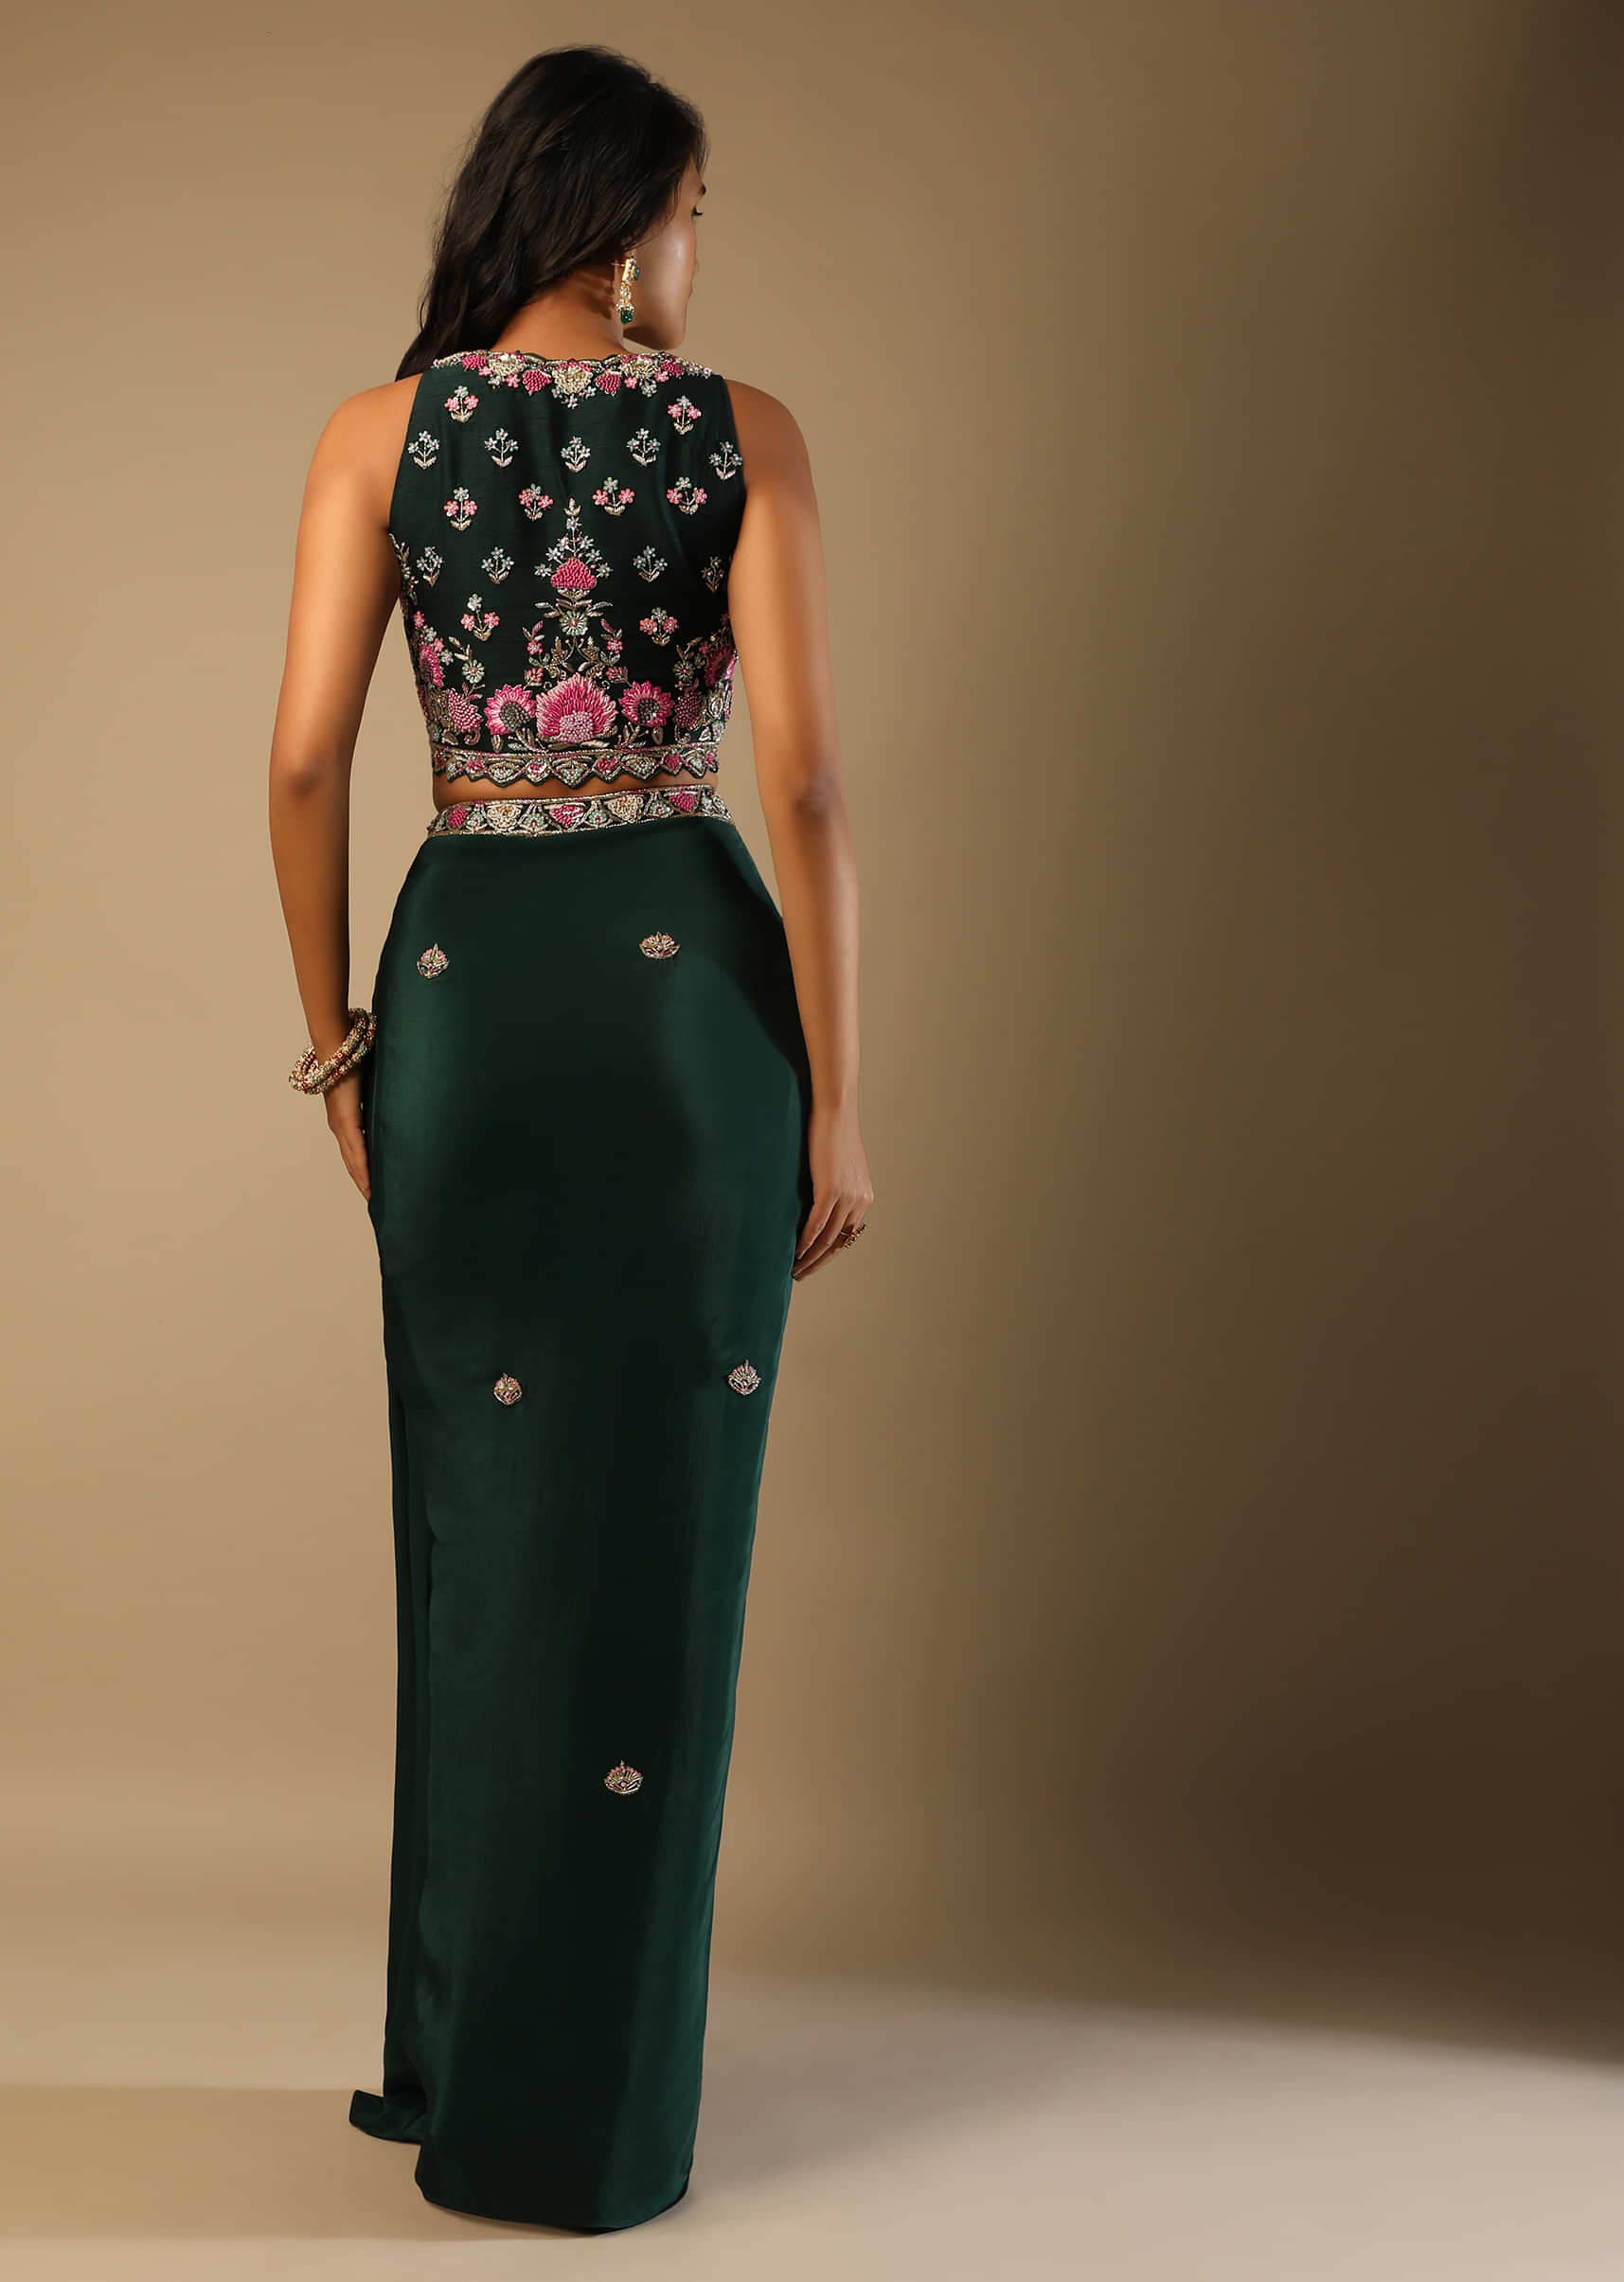 Bottle Green Dhoti Skirt And Choli With Multi Colored Hand Embroidery In Floral Motifs  